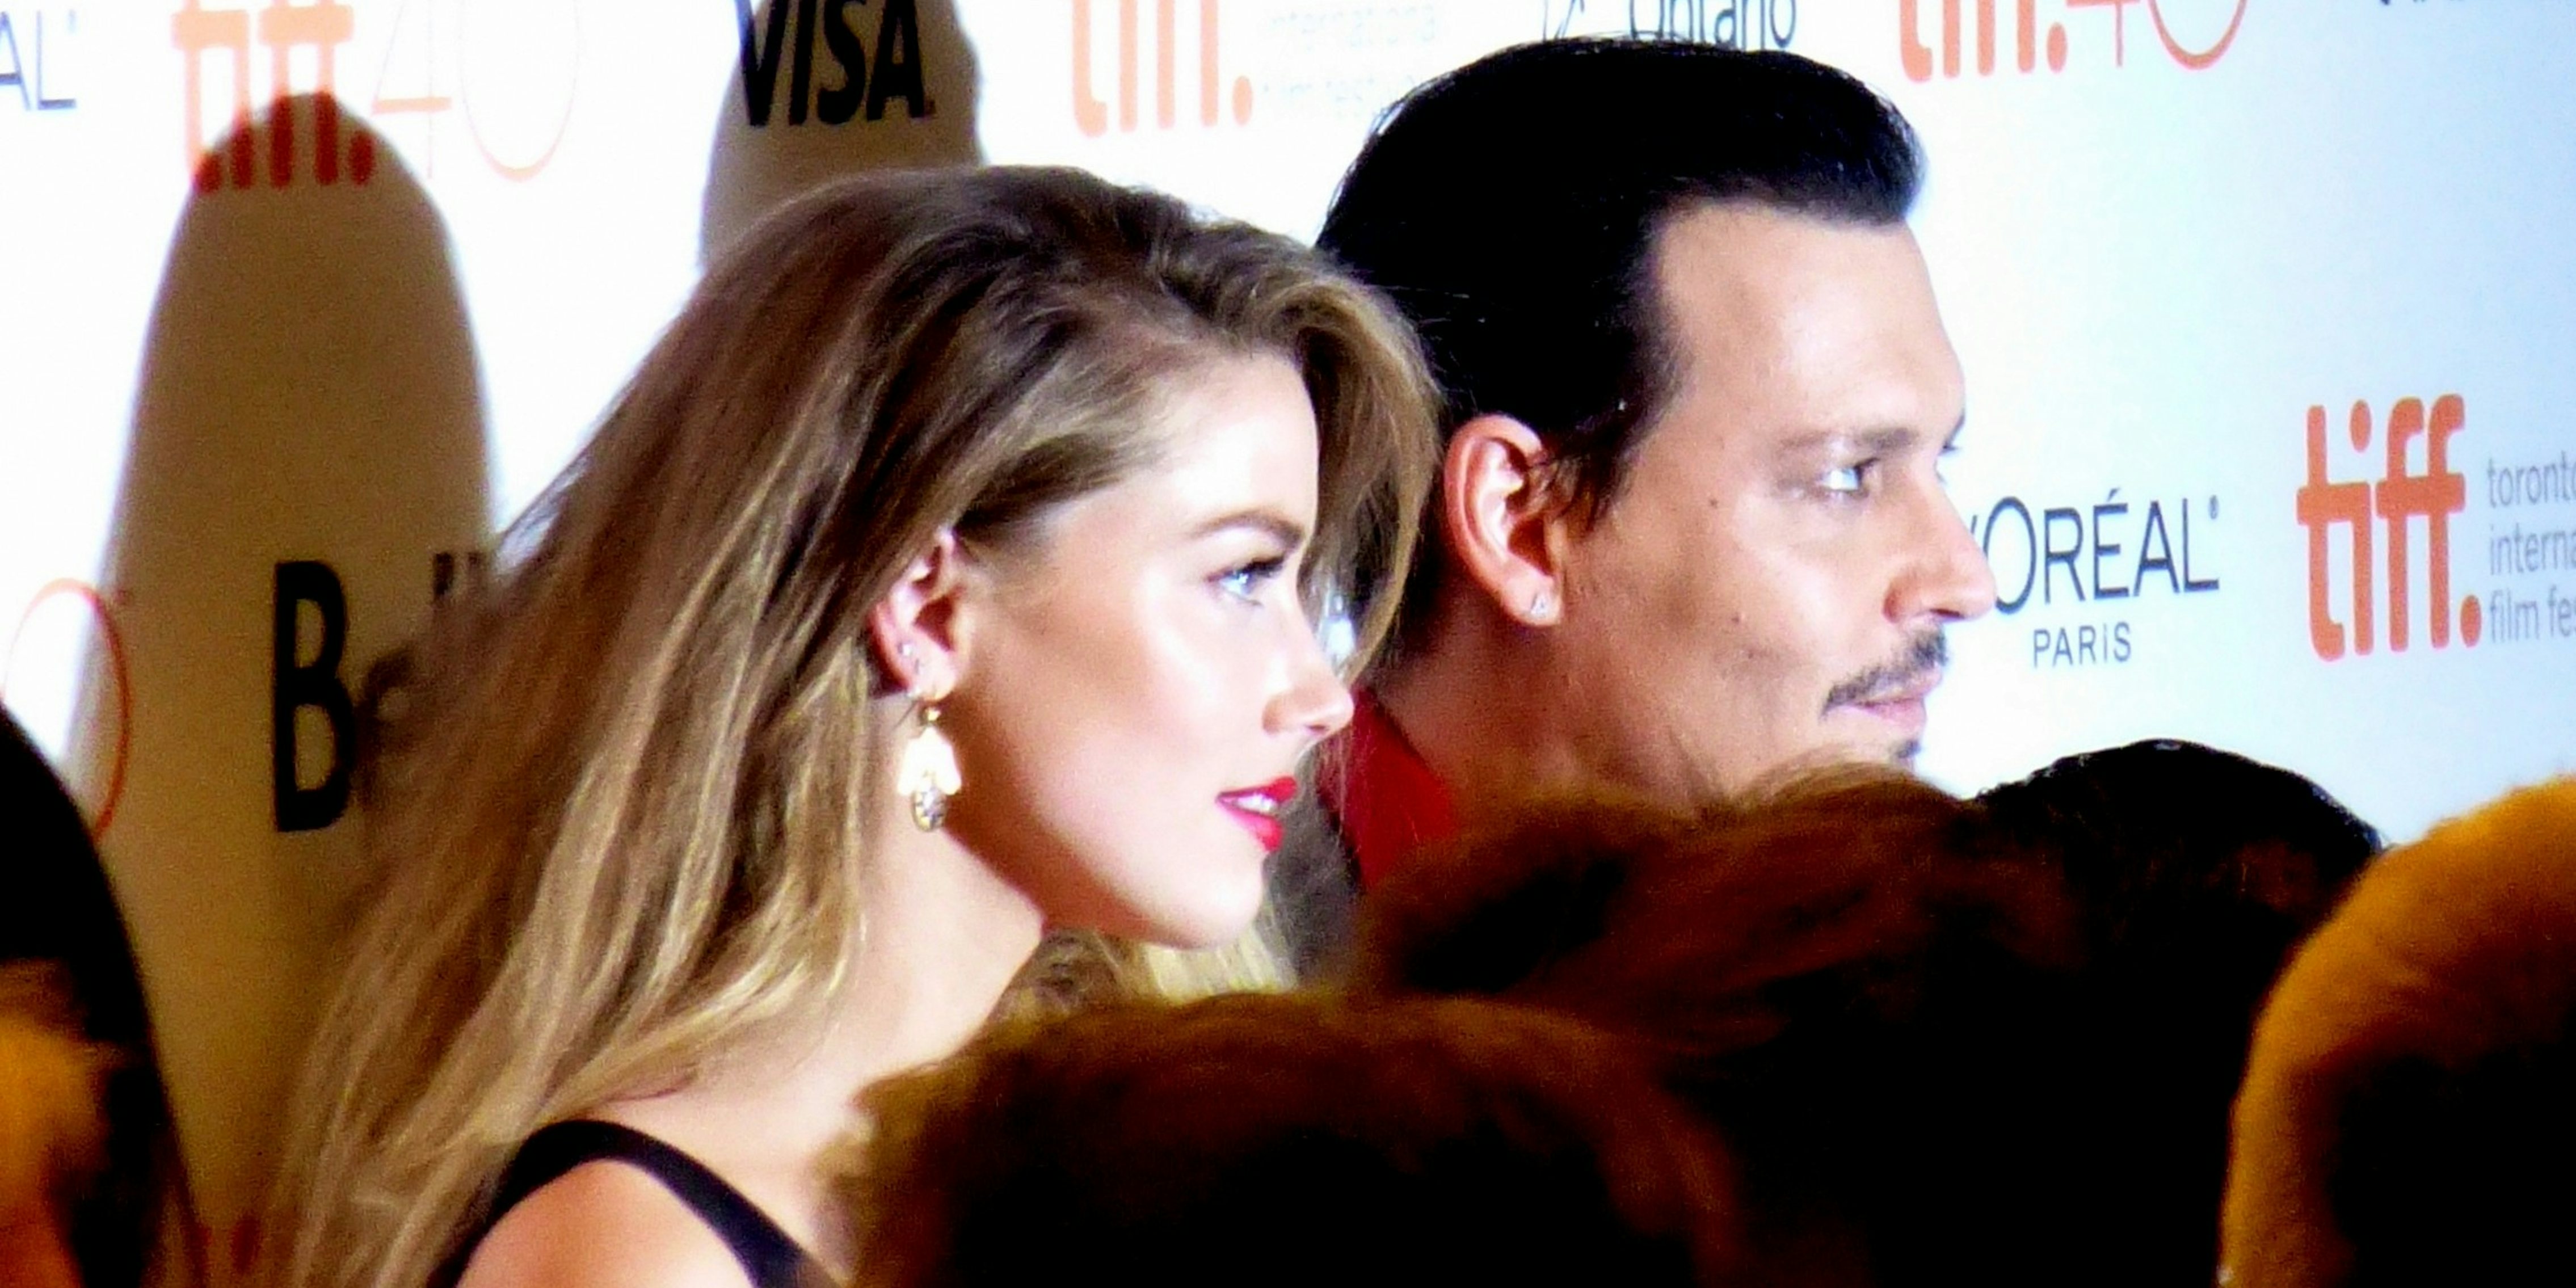 Amber Heard and Johnny Depp at the premiere of Black Mass, 2015 Toronto Film Festival